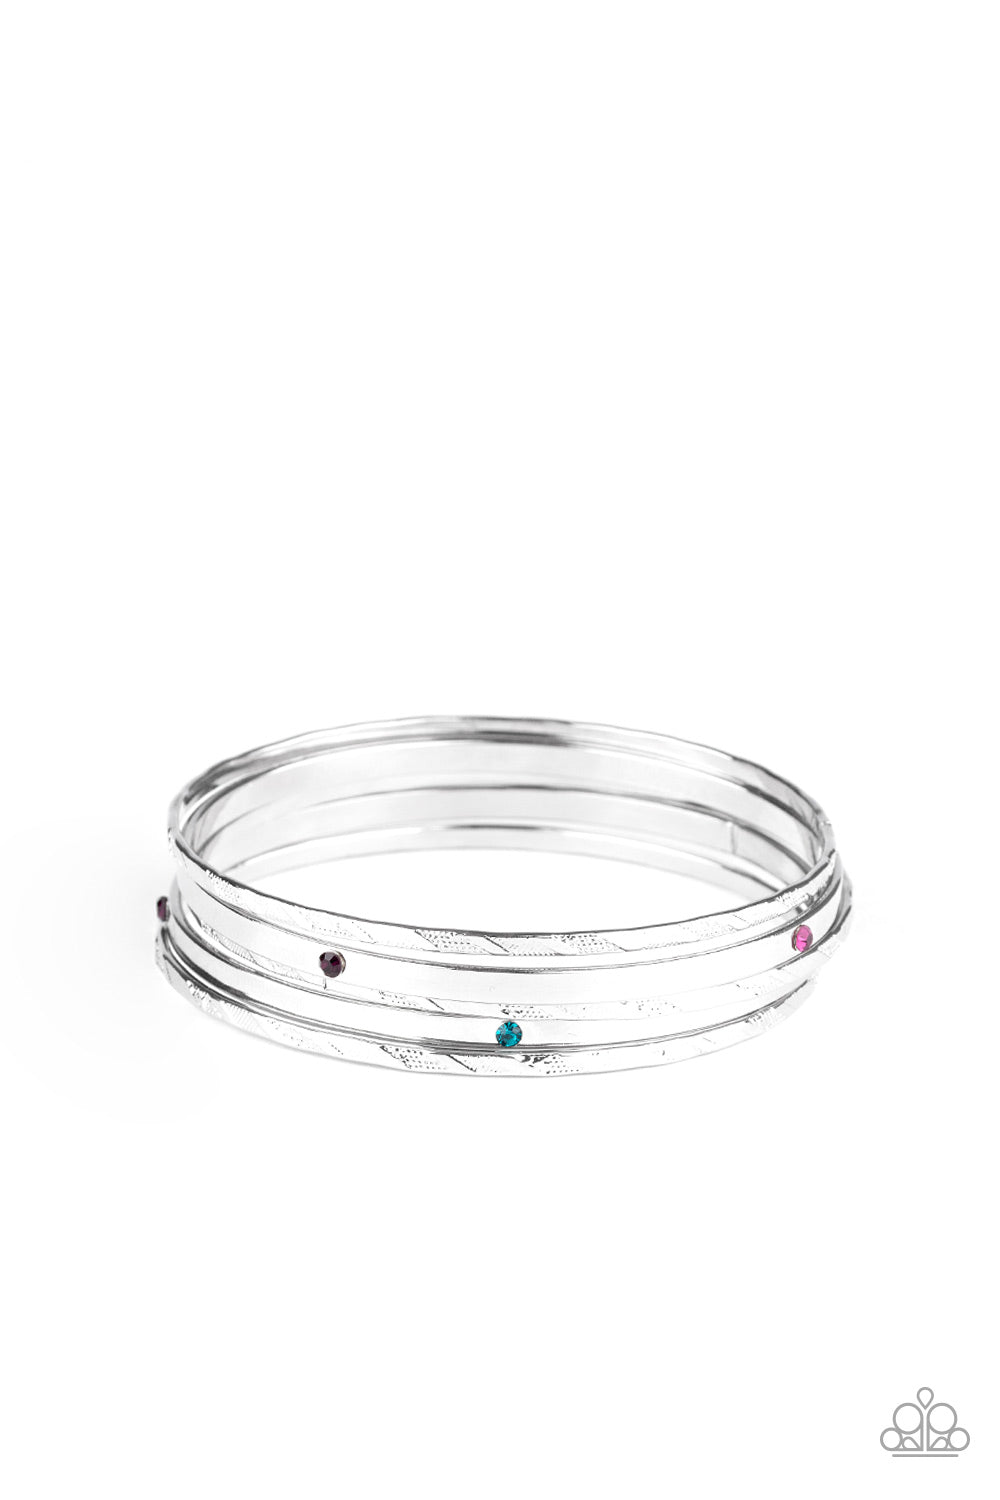 Be There With Baubles On - Multi Bangle Bracelet Set - Princess Glam Shop